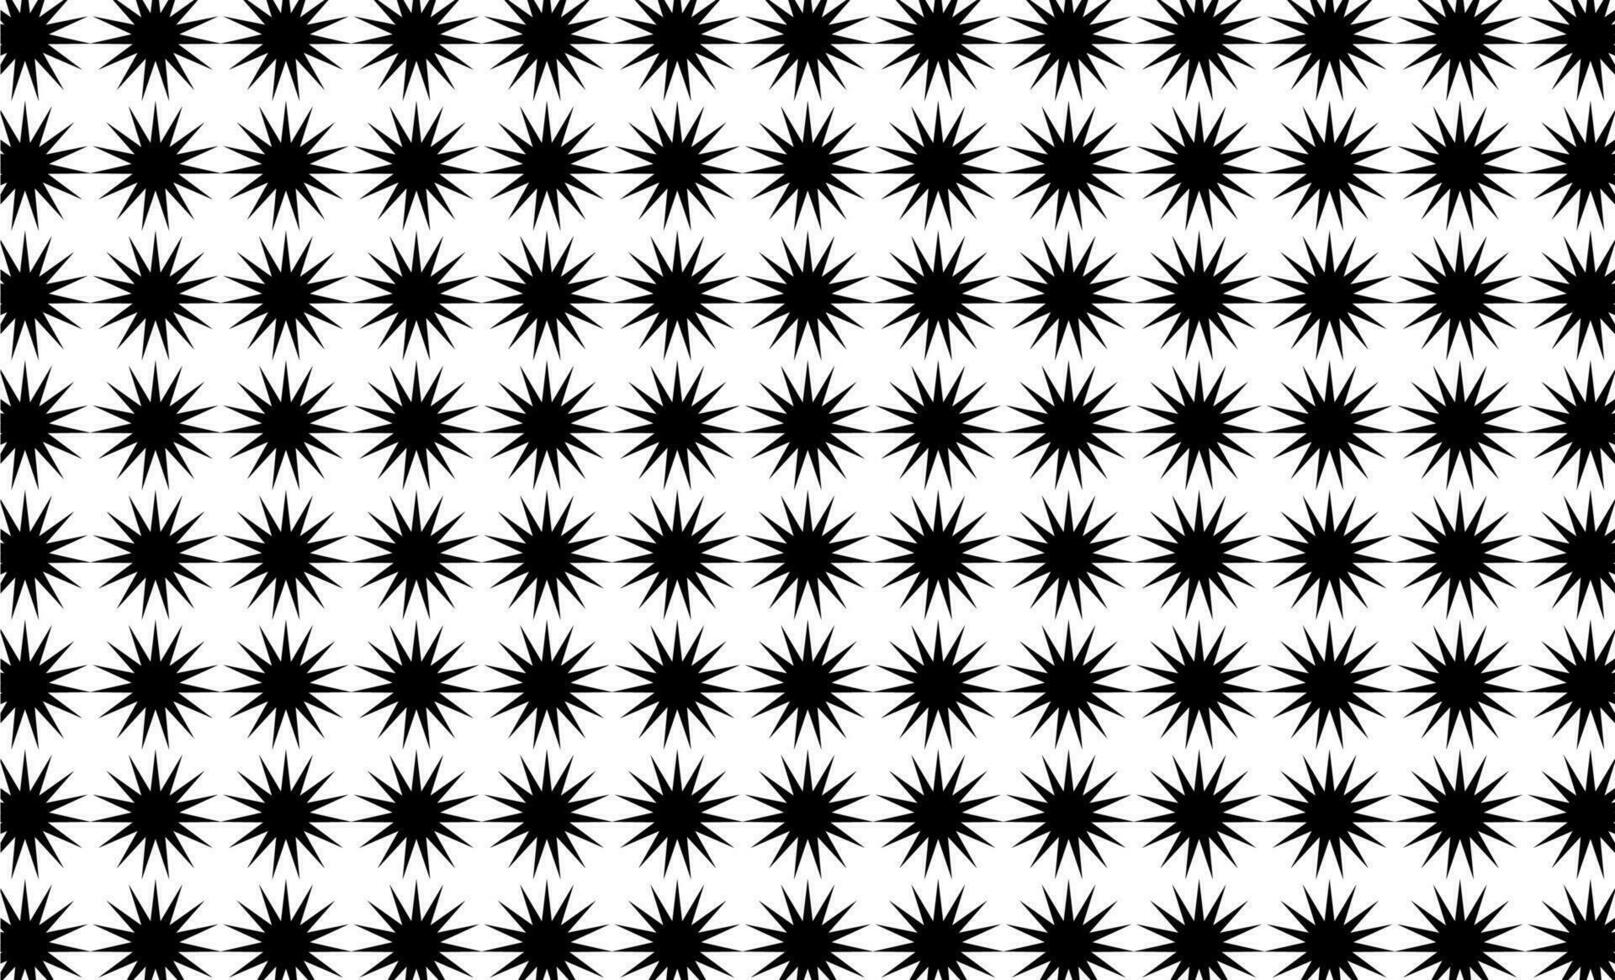 seamless pattern background in black and white colors vector